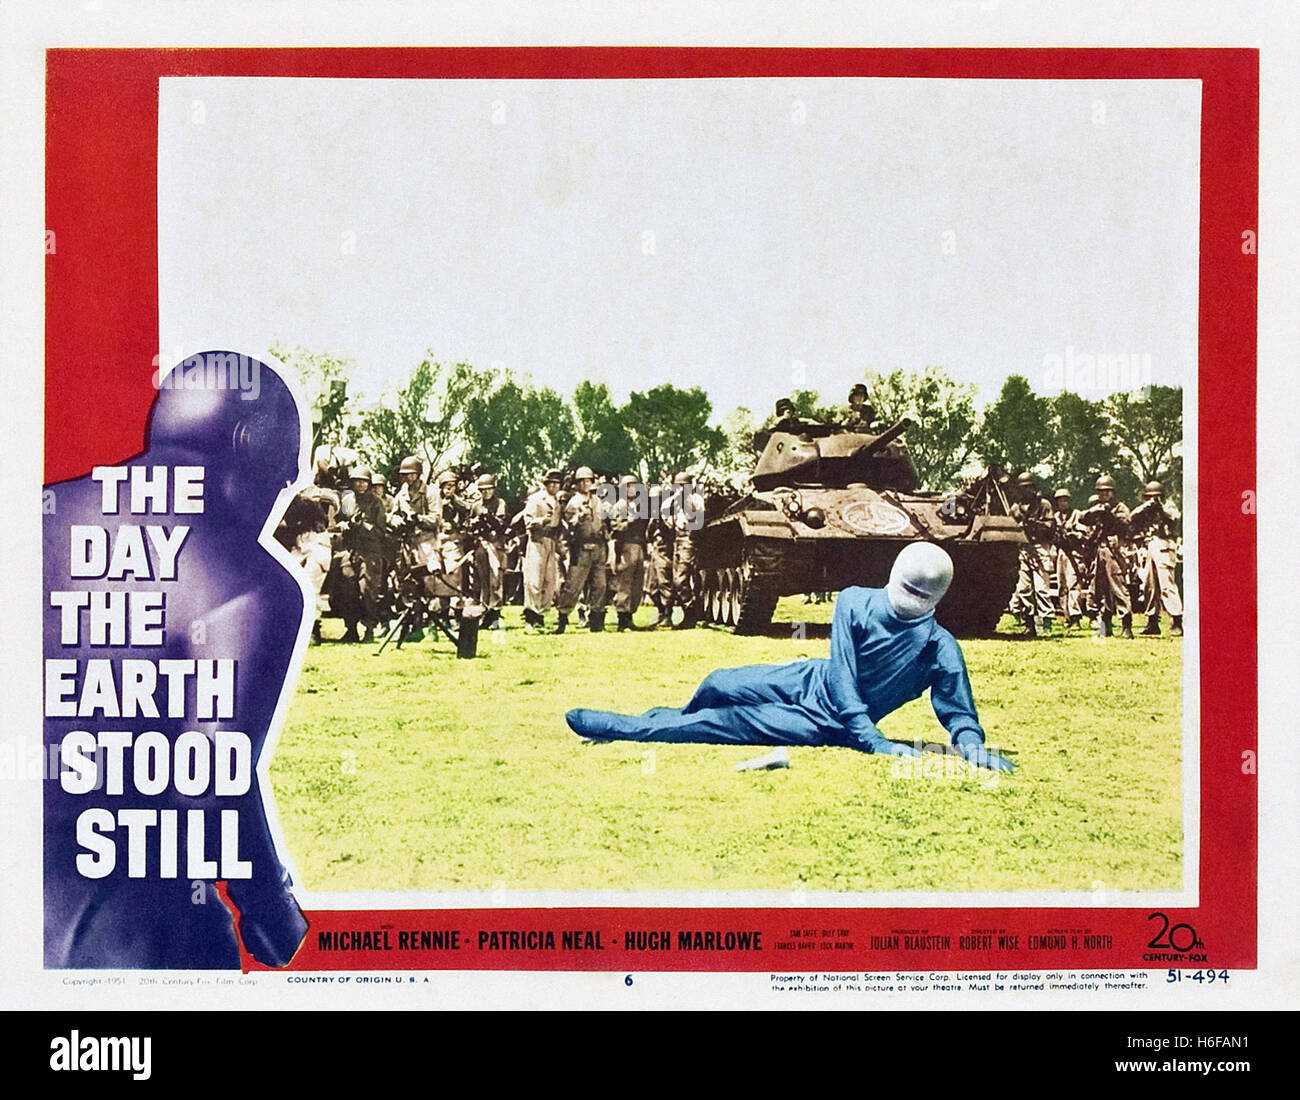 The Day The Earth Stood Still - Movie Poster Stock Photo - A